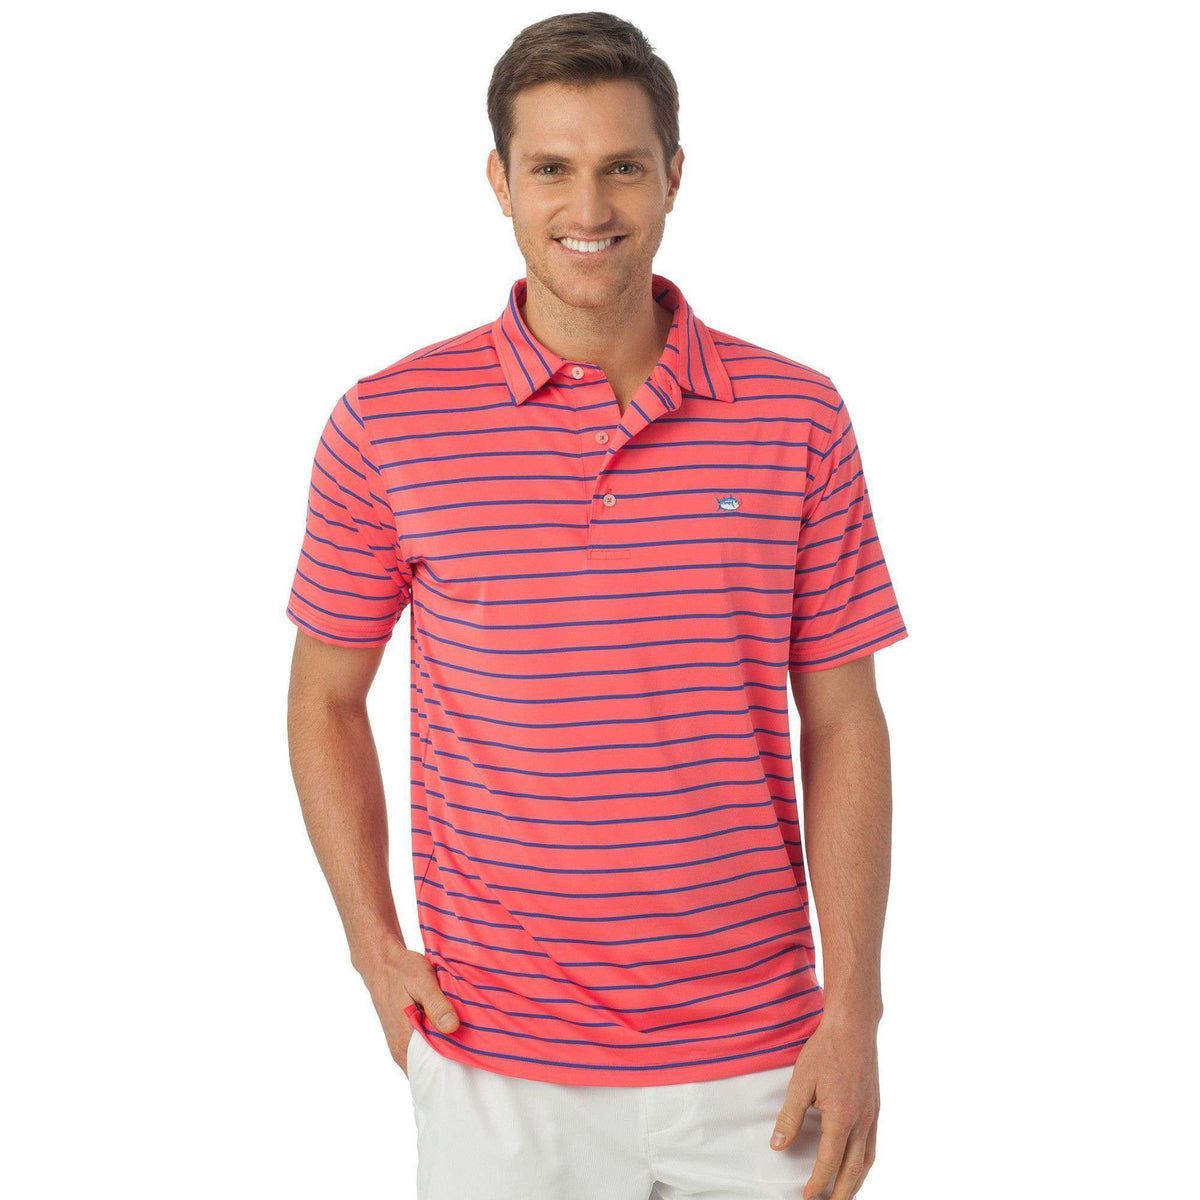 Driver Stripe Performance Polo in Sunset by Southern Tide - Country Club Prep